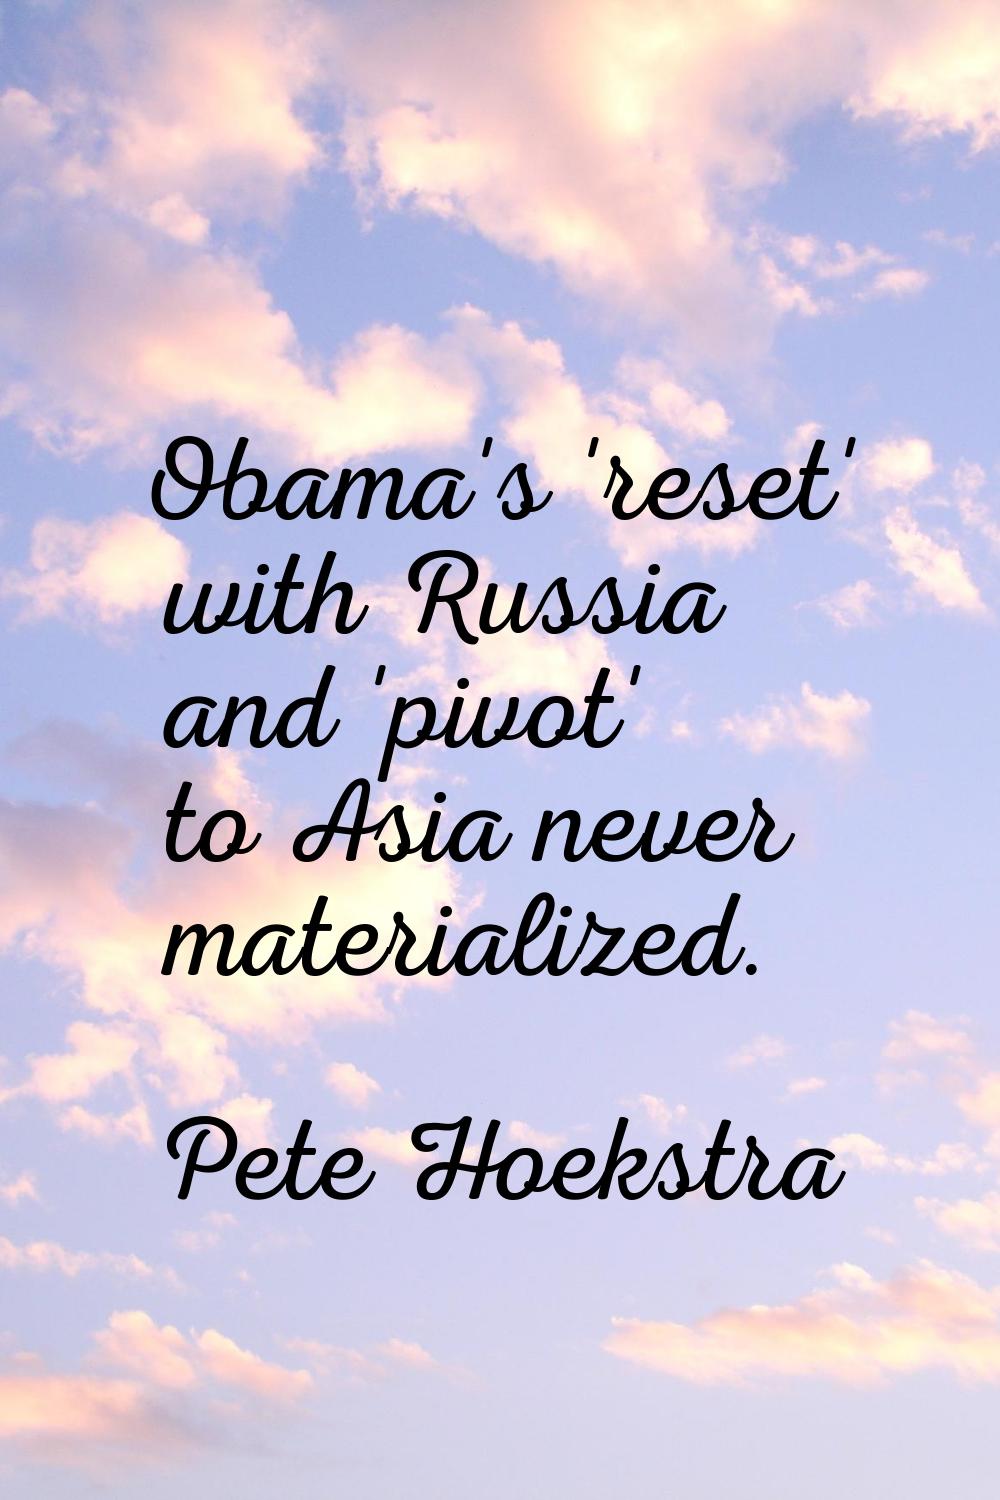 Obama's 'reset' with Russia and 'pivot' to Asia never materialized.